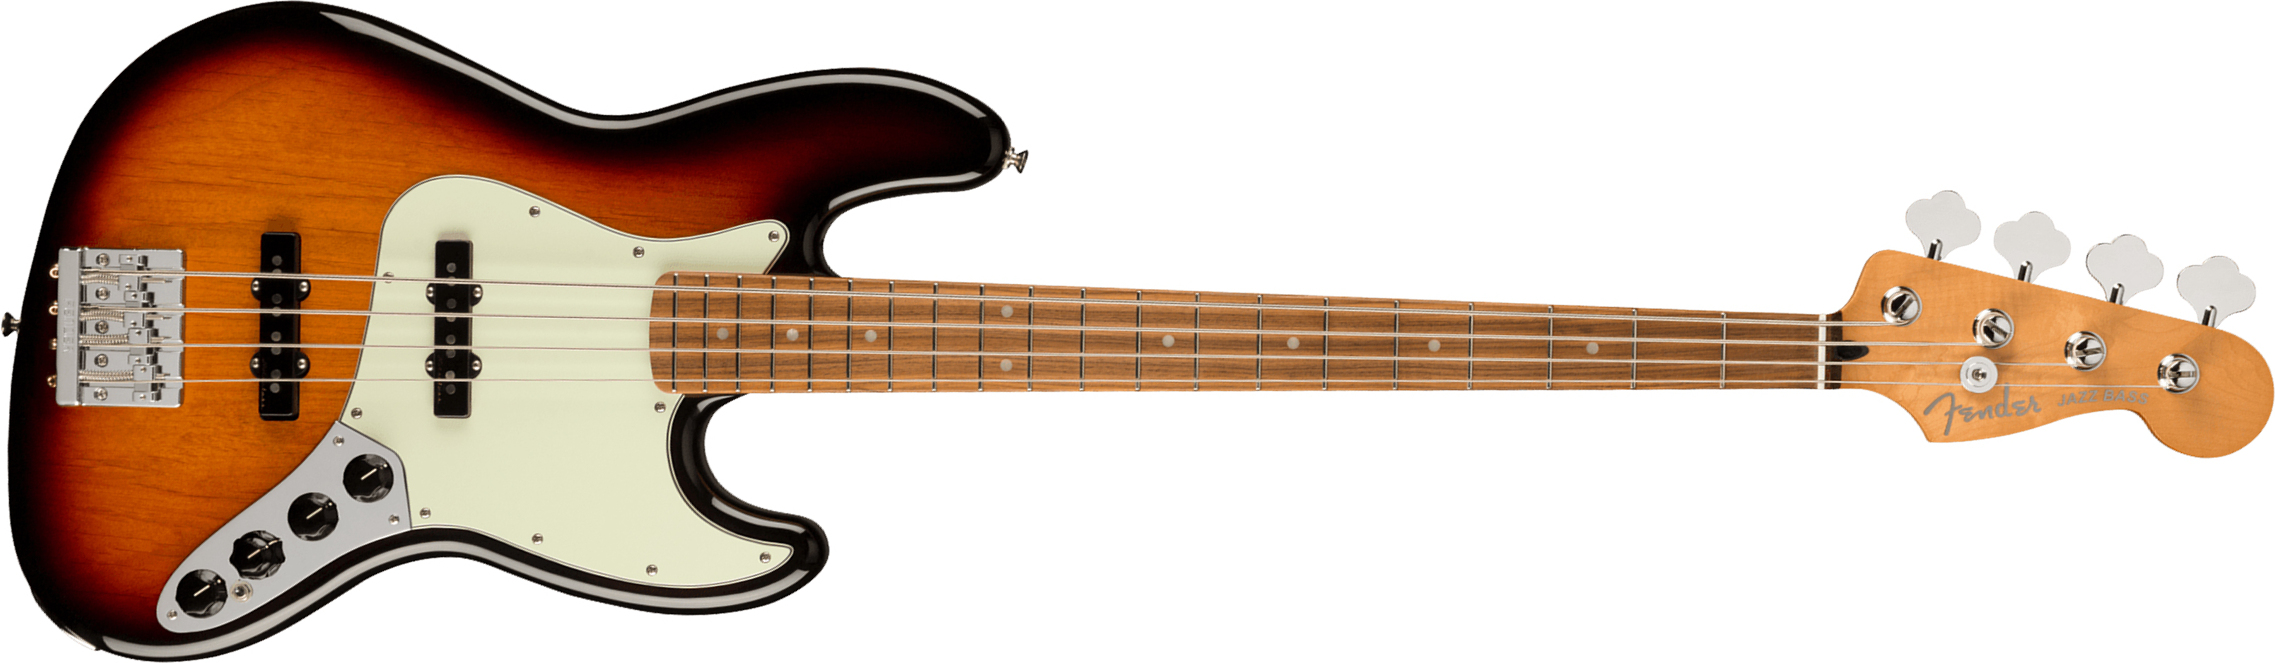 Fender Jazz Bass Player Plus Mex Active Pf - 3-color Sunburst - Solid body electric bass - Main picture